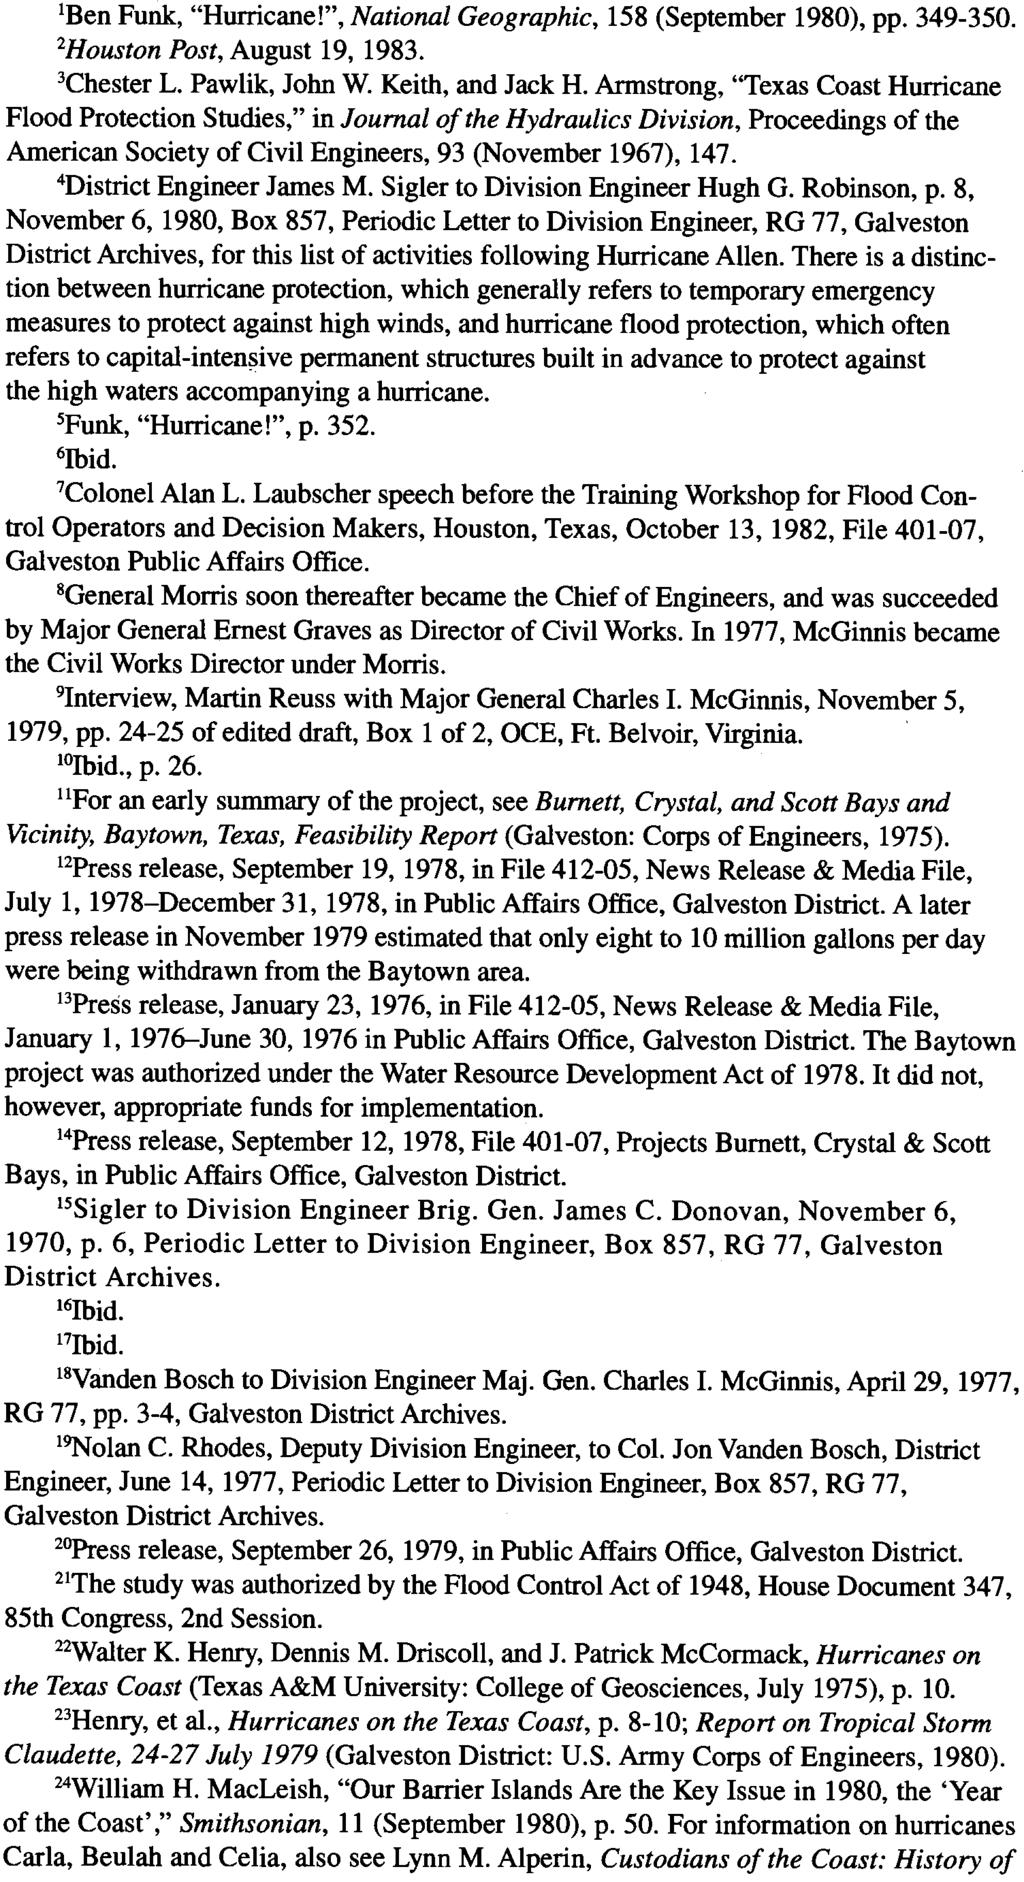 92 REFERENCE NOTES lben Funk, "Hurricane!", National Geographic, 158 (September 1980), pp. 349-350. 2Houston Post, August 19, 1983. 3Chester L. Pawlik, John W. Keith, and Jack H.